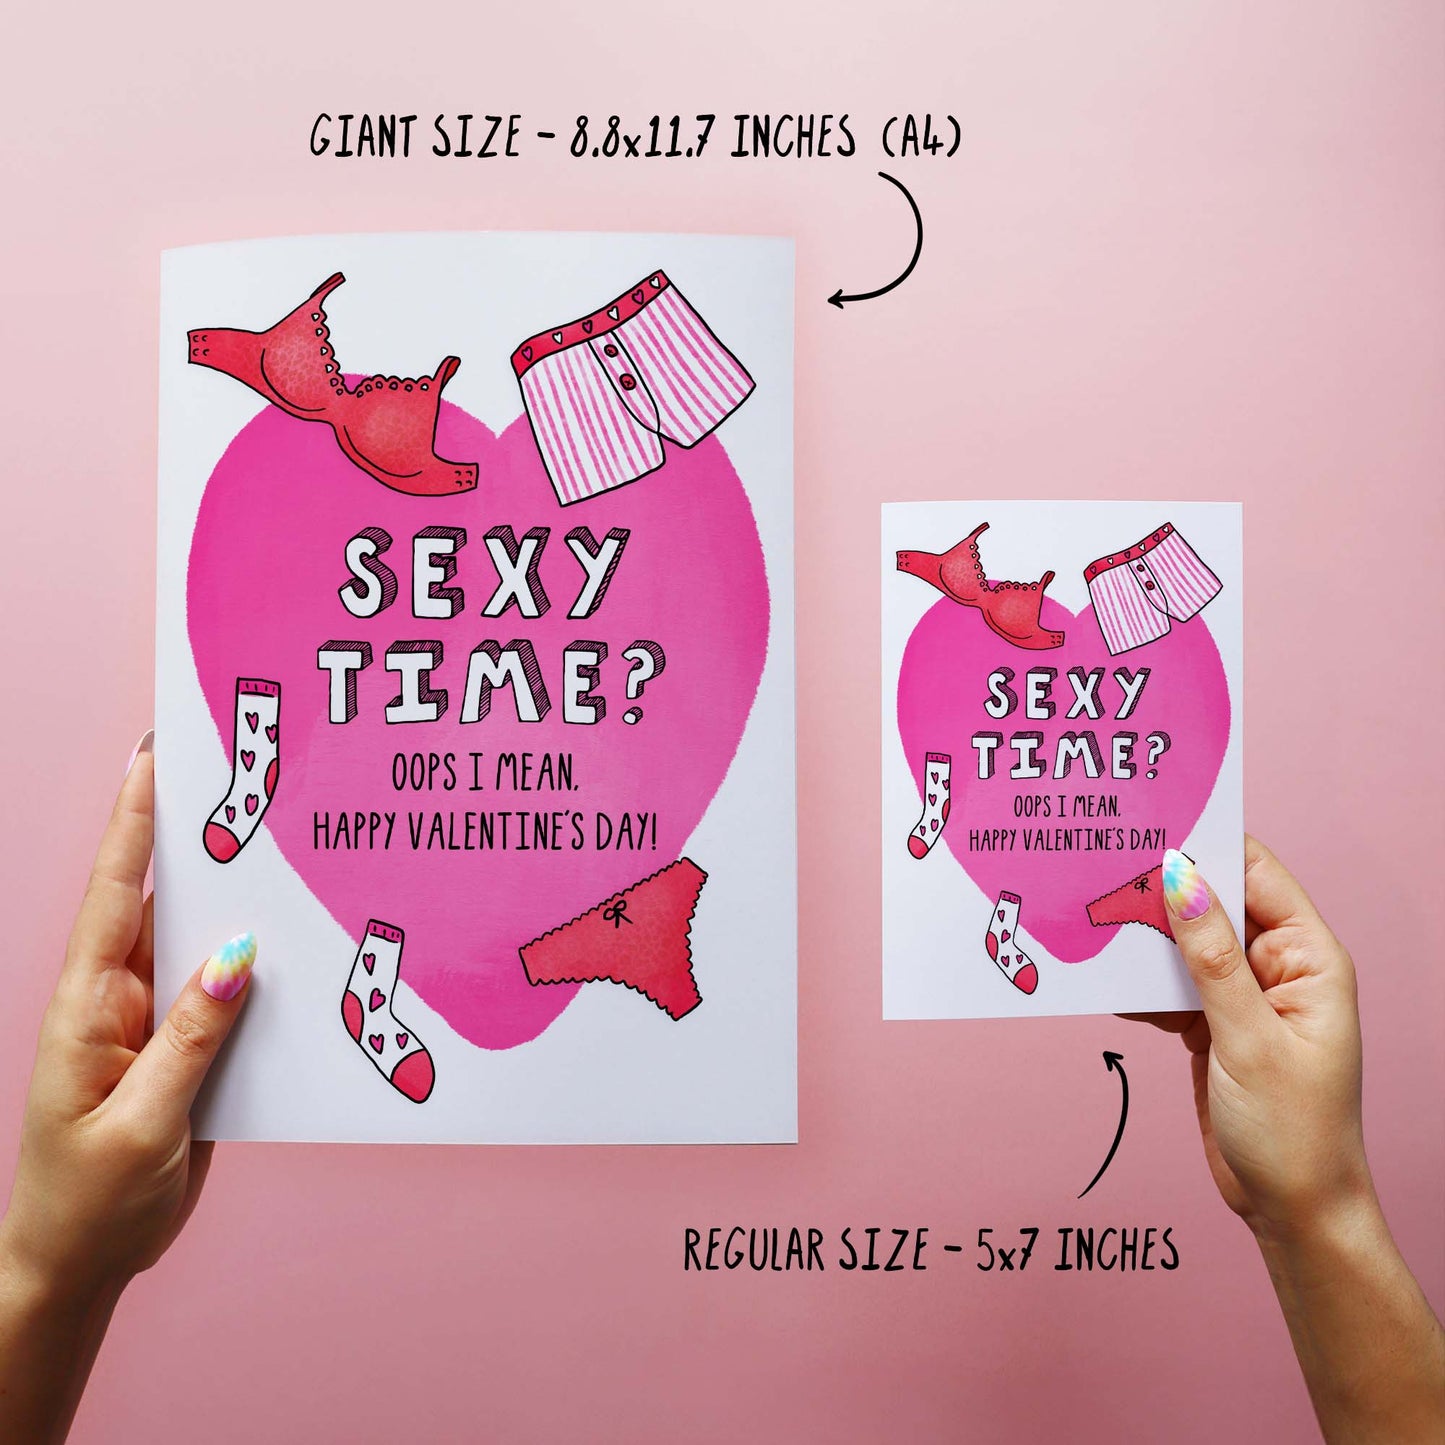 Sexy Time - Rude Valentine's Card